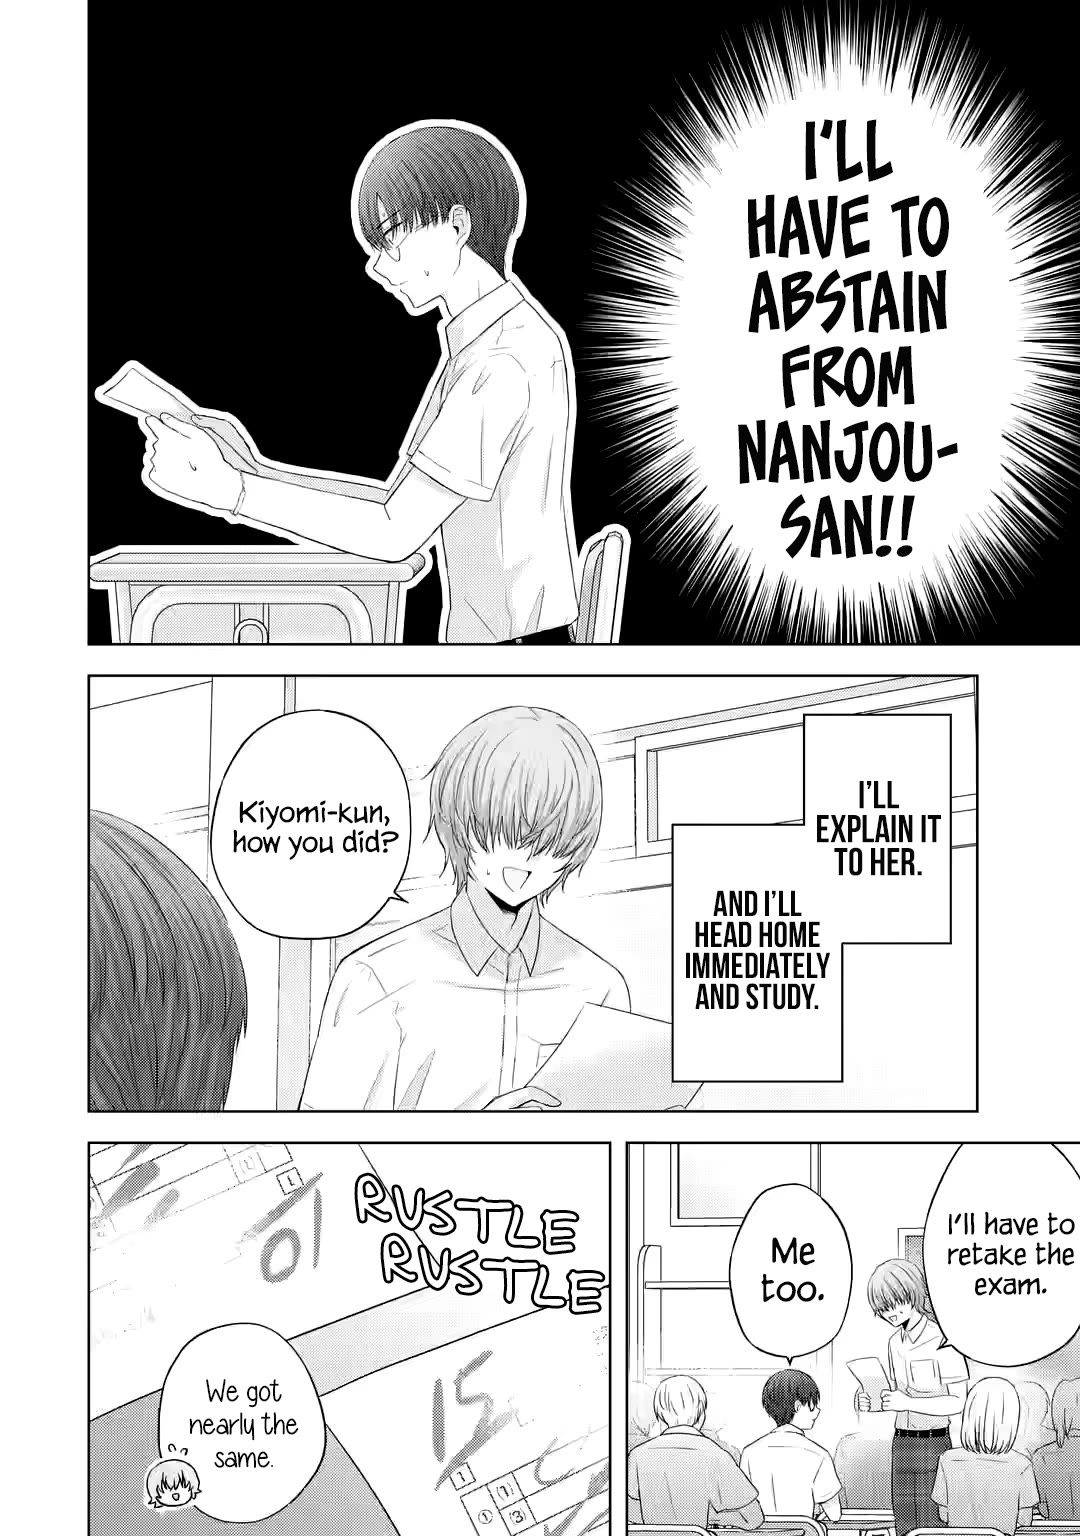 Nanjou-san Wants to Be Held by Me - chapter 13 - #5